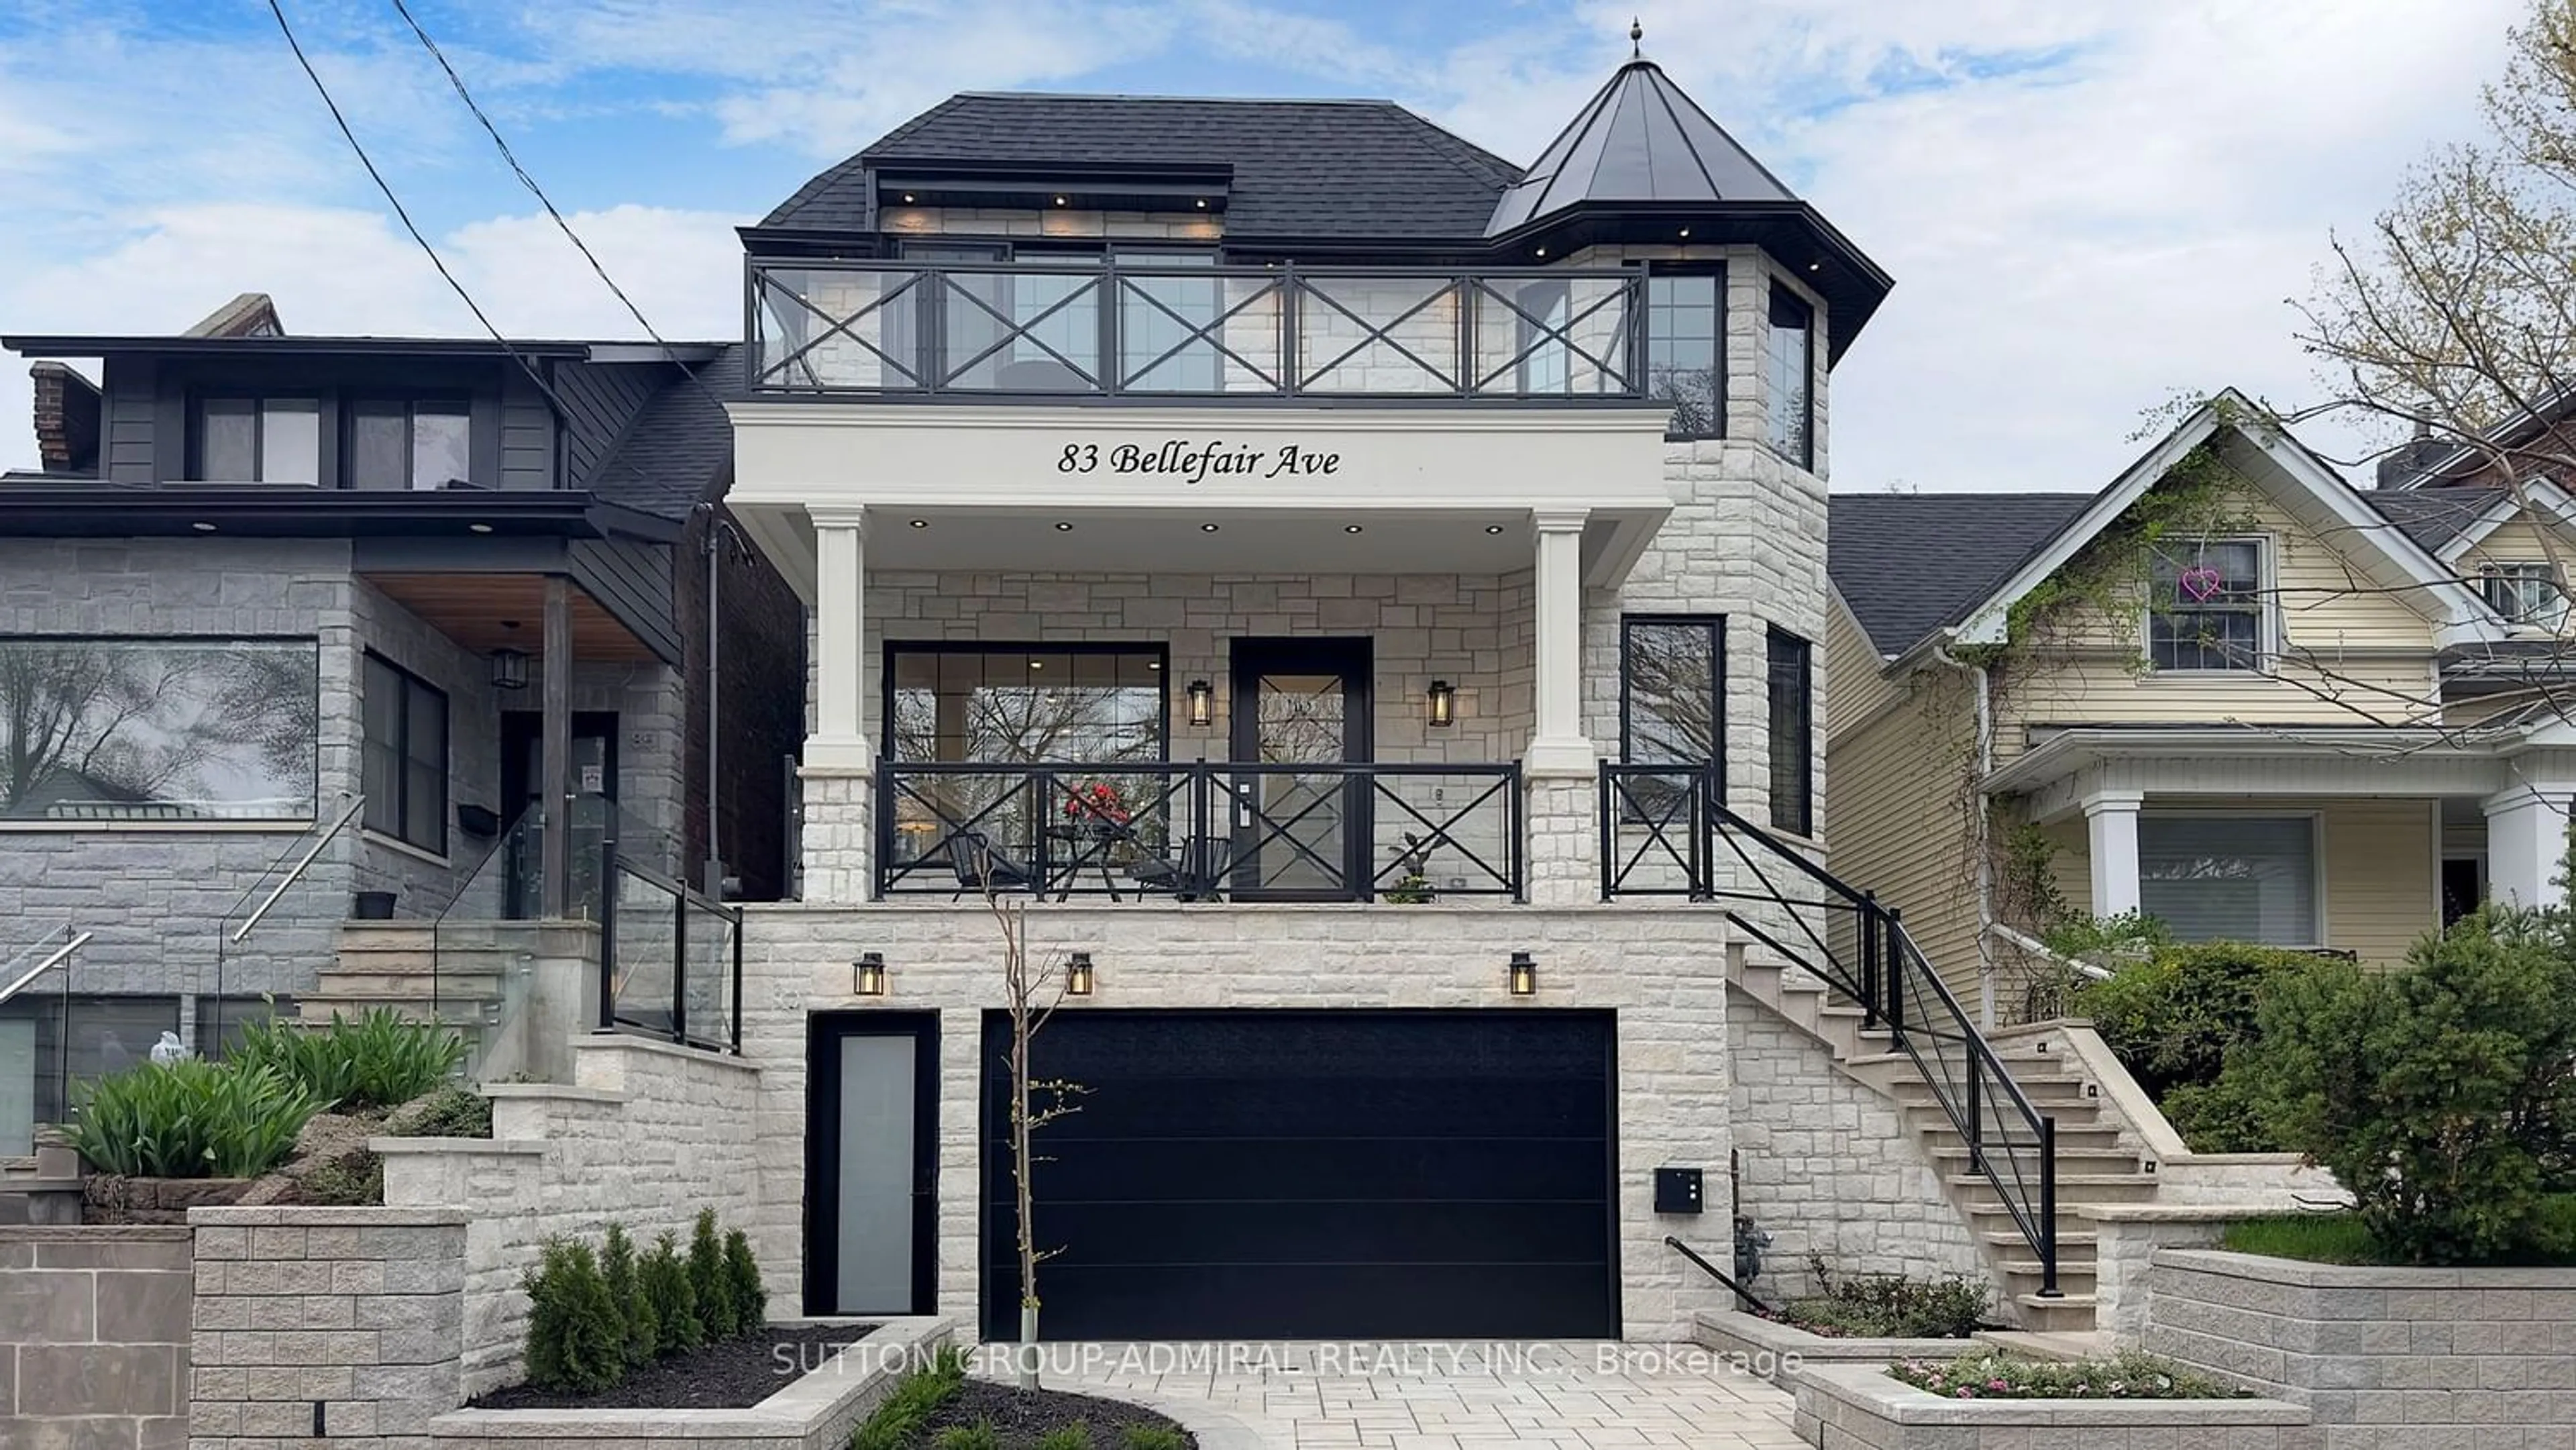 Frontside or backside of a home for 83 Bellefair Ave, Toronto Ontario M4L 3T7